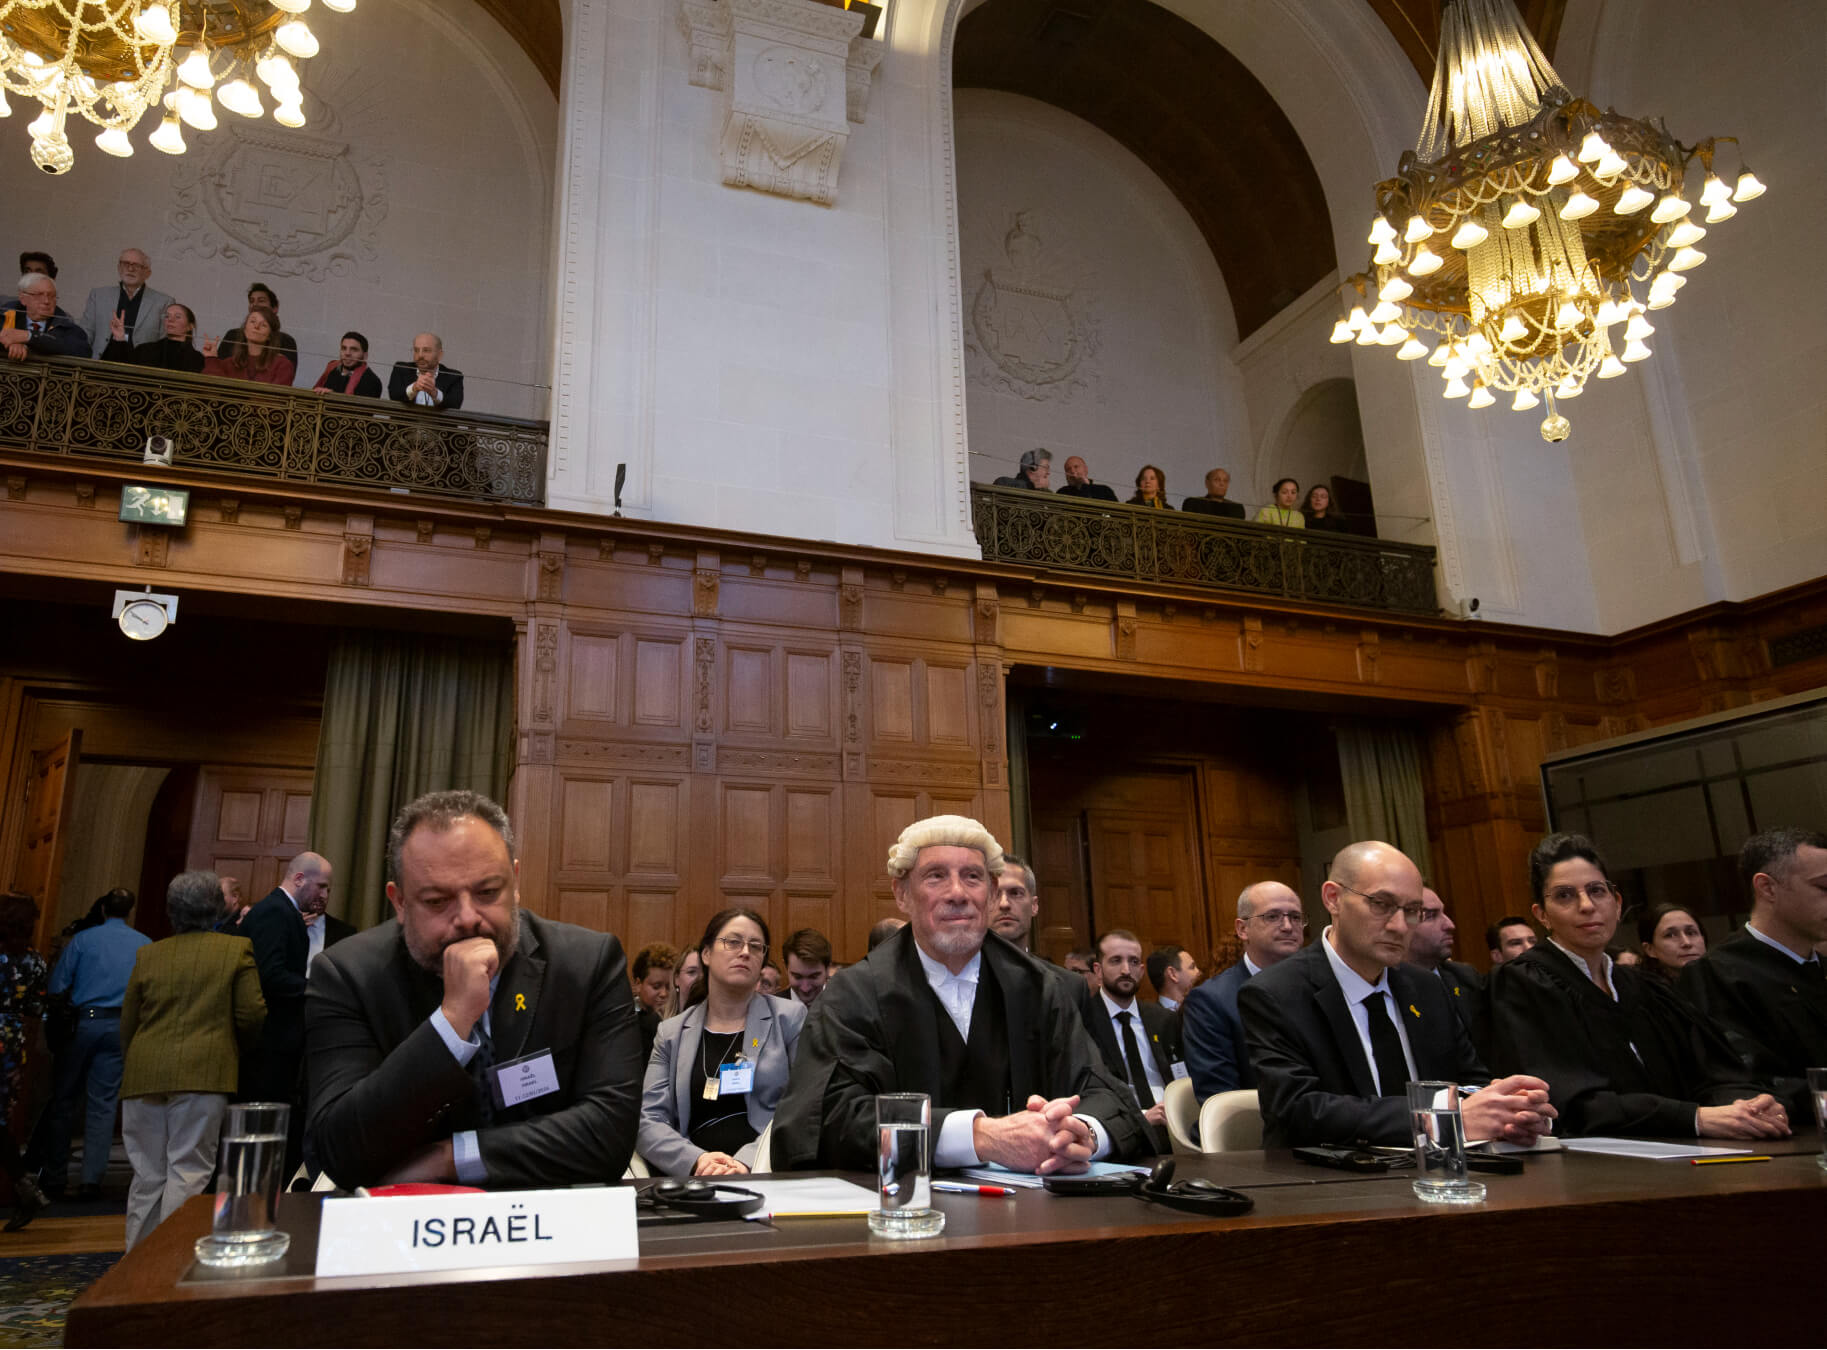 Israeli lawyer Tal Becker (left) and  barrister Malcolm Shaw of Great Britain are part of the Israeli team at the International Criminal Court in the Hague on Jan. 11. The court is considering a case in which South Africa has accused Israel of genocide in Gaza.